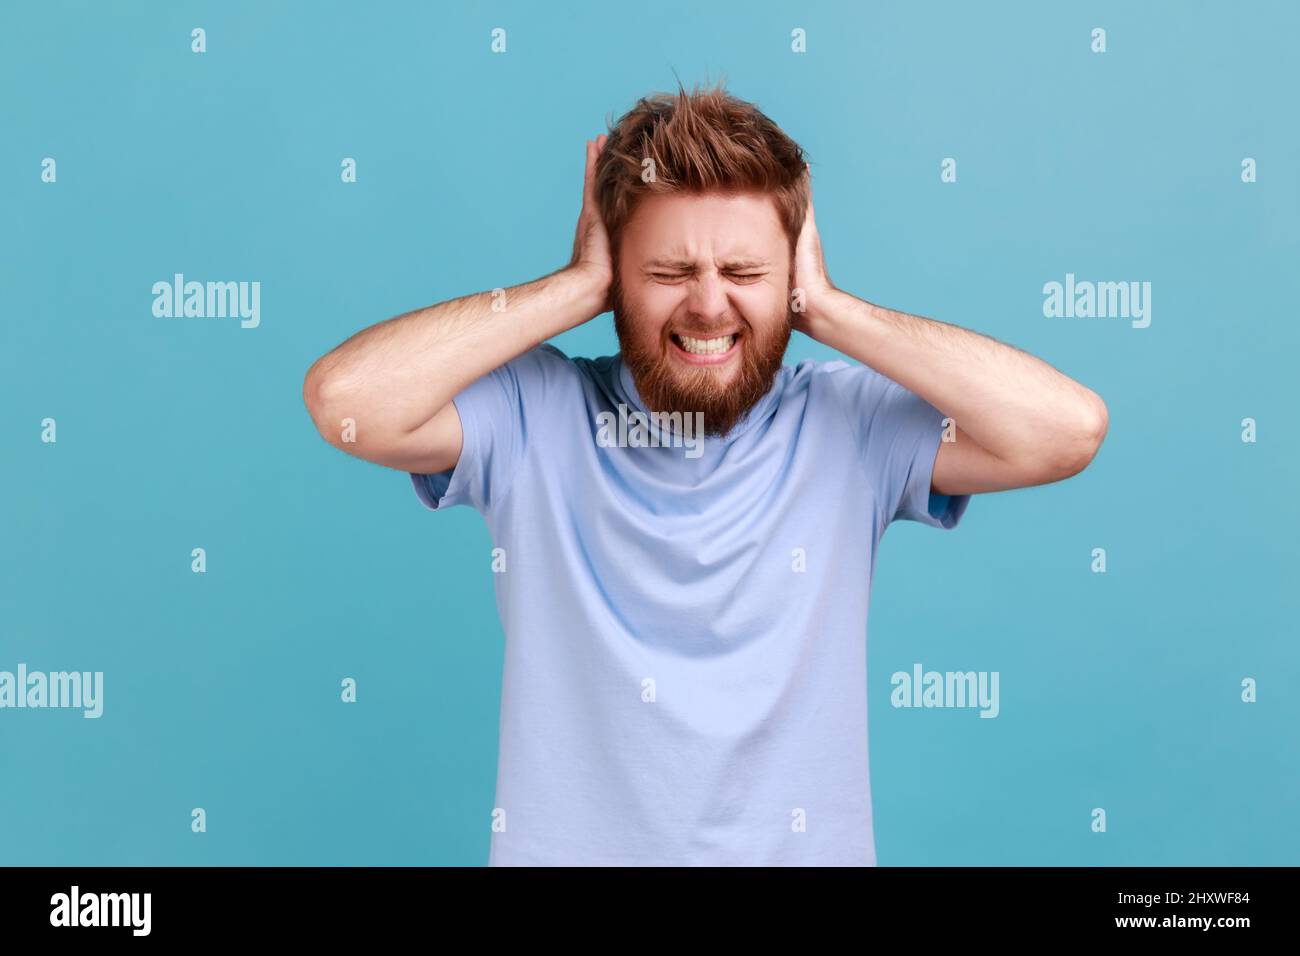 Don't want to listen. Portrait of despaired man irritated by loud noise covering ears and grimacing in pain, suffering annoying high-decibel sound. Indoor studio shot isolated on blue background. Stock Photo